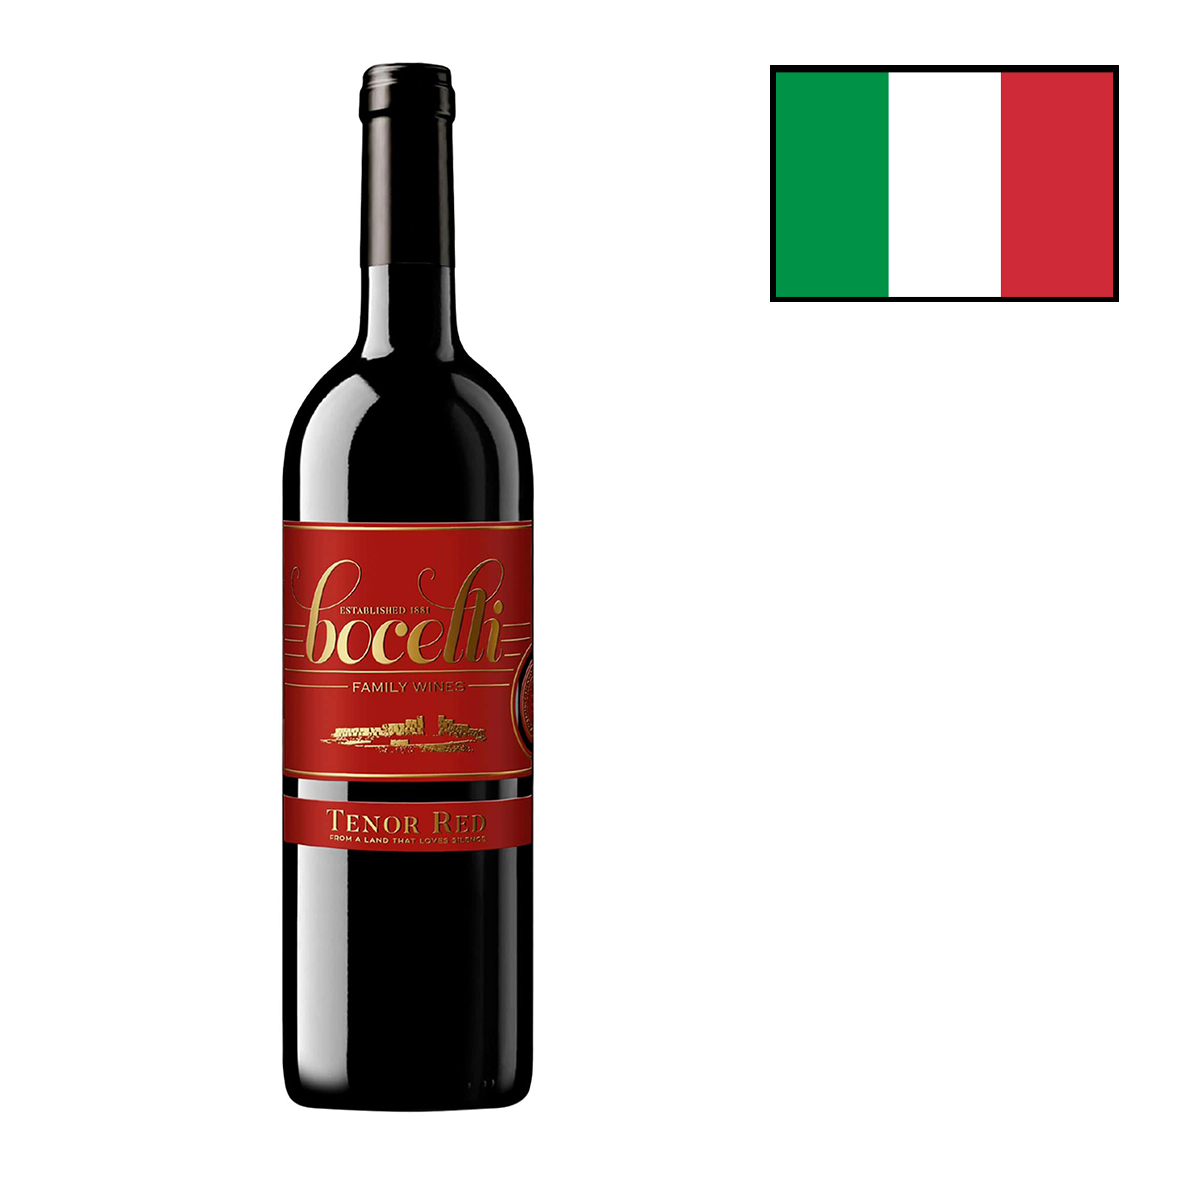 0892591000688 - TENOR RED ROSSO IGT 2016 -BOCELLI 750ML